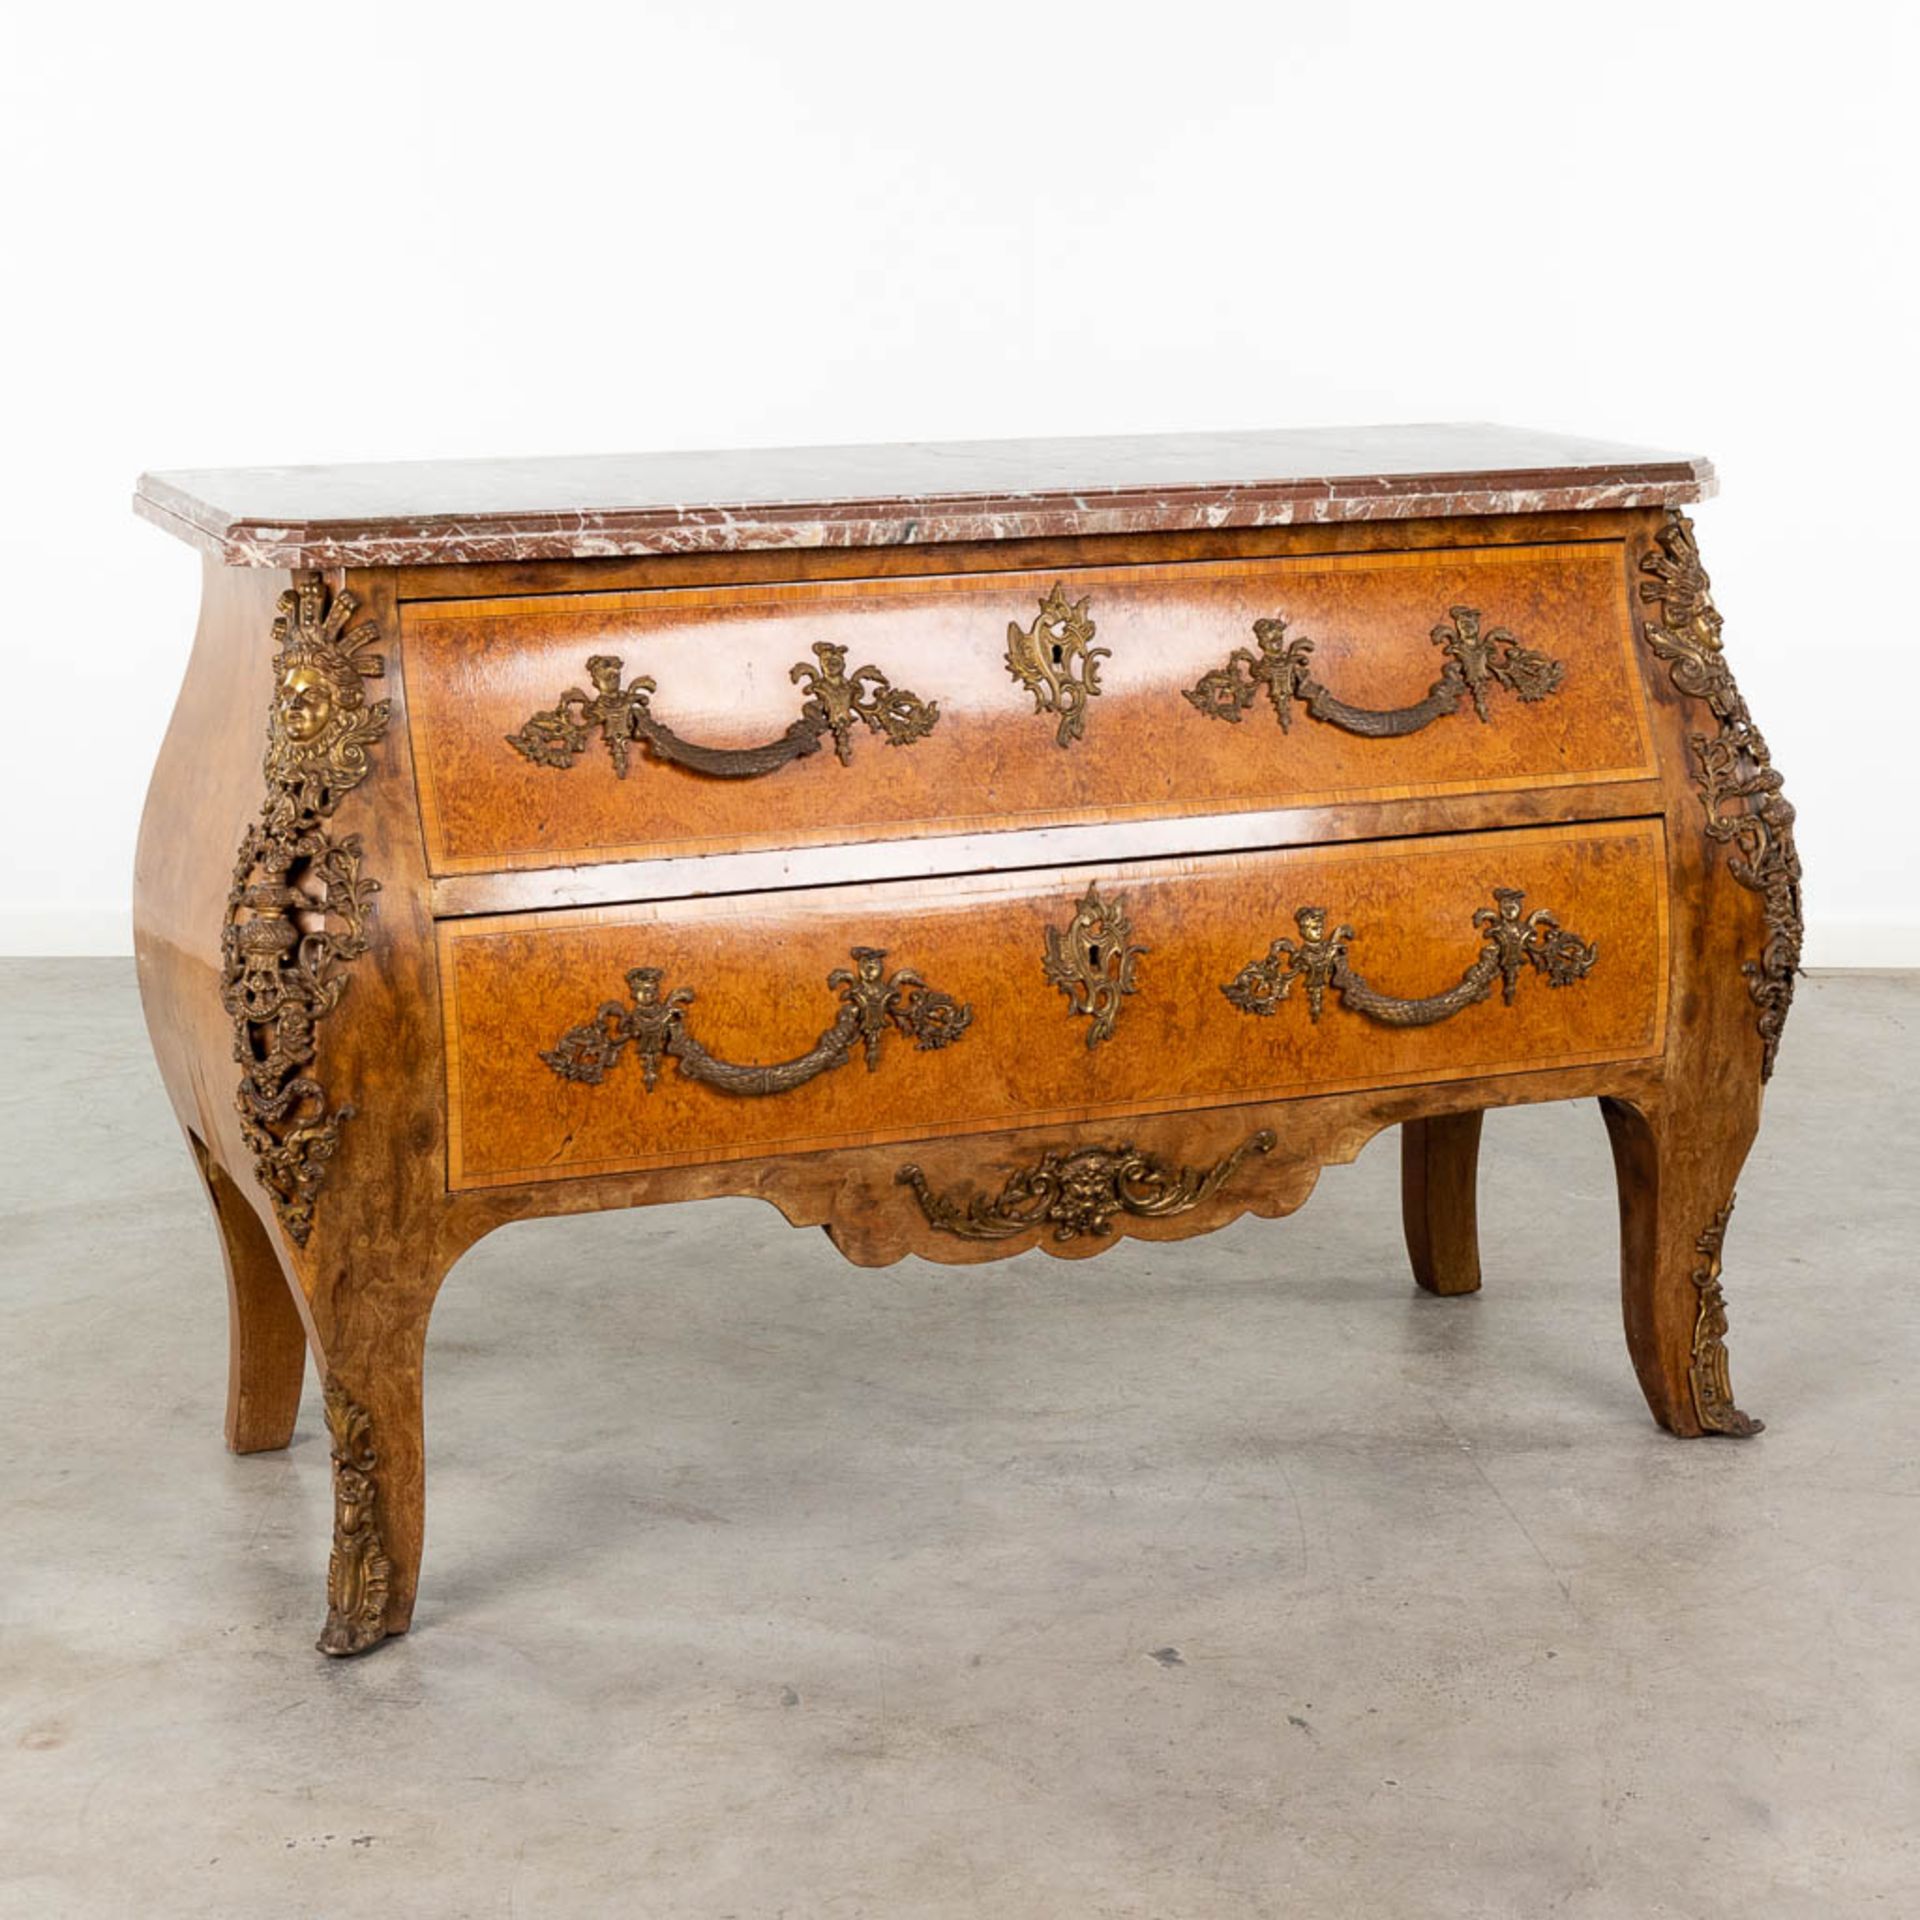 A two-drawer commode mounted with bronze and a marble top. 20th C. (L: 55 x W: 132 x H: 88 cm)